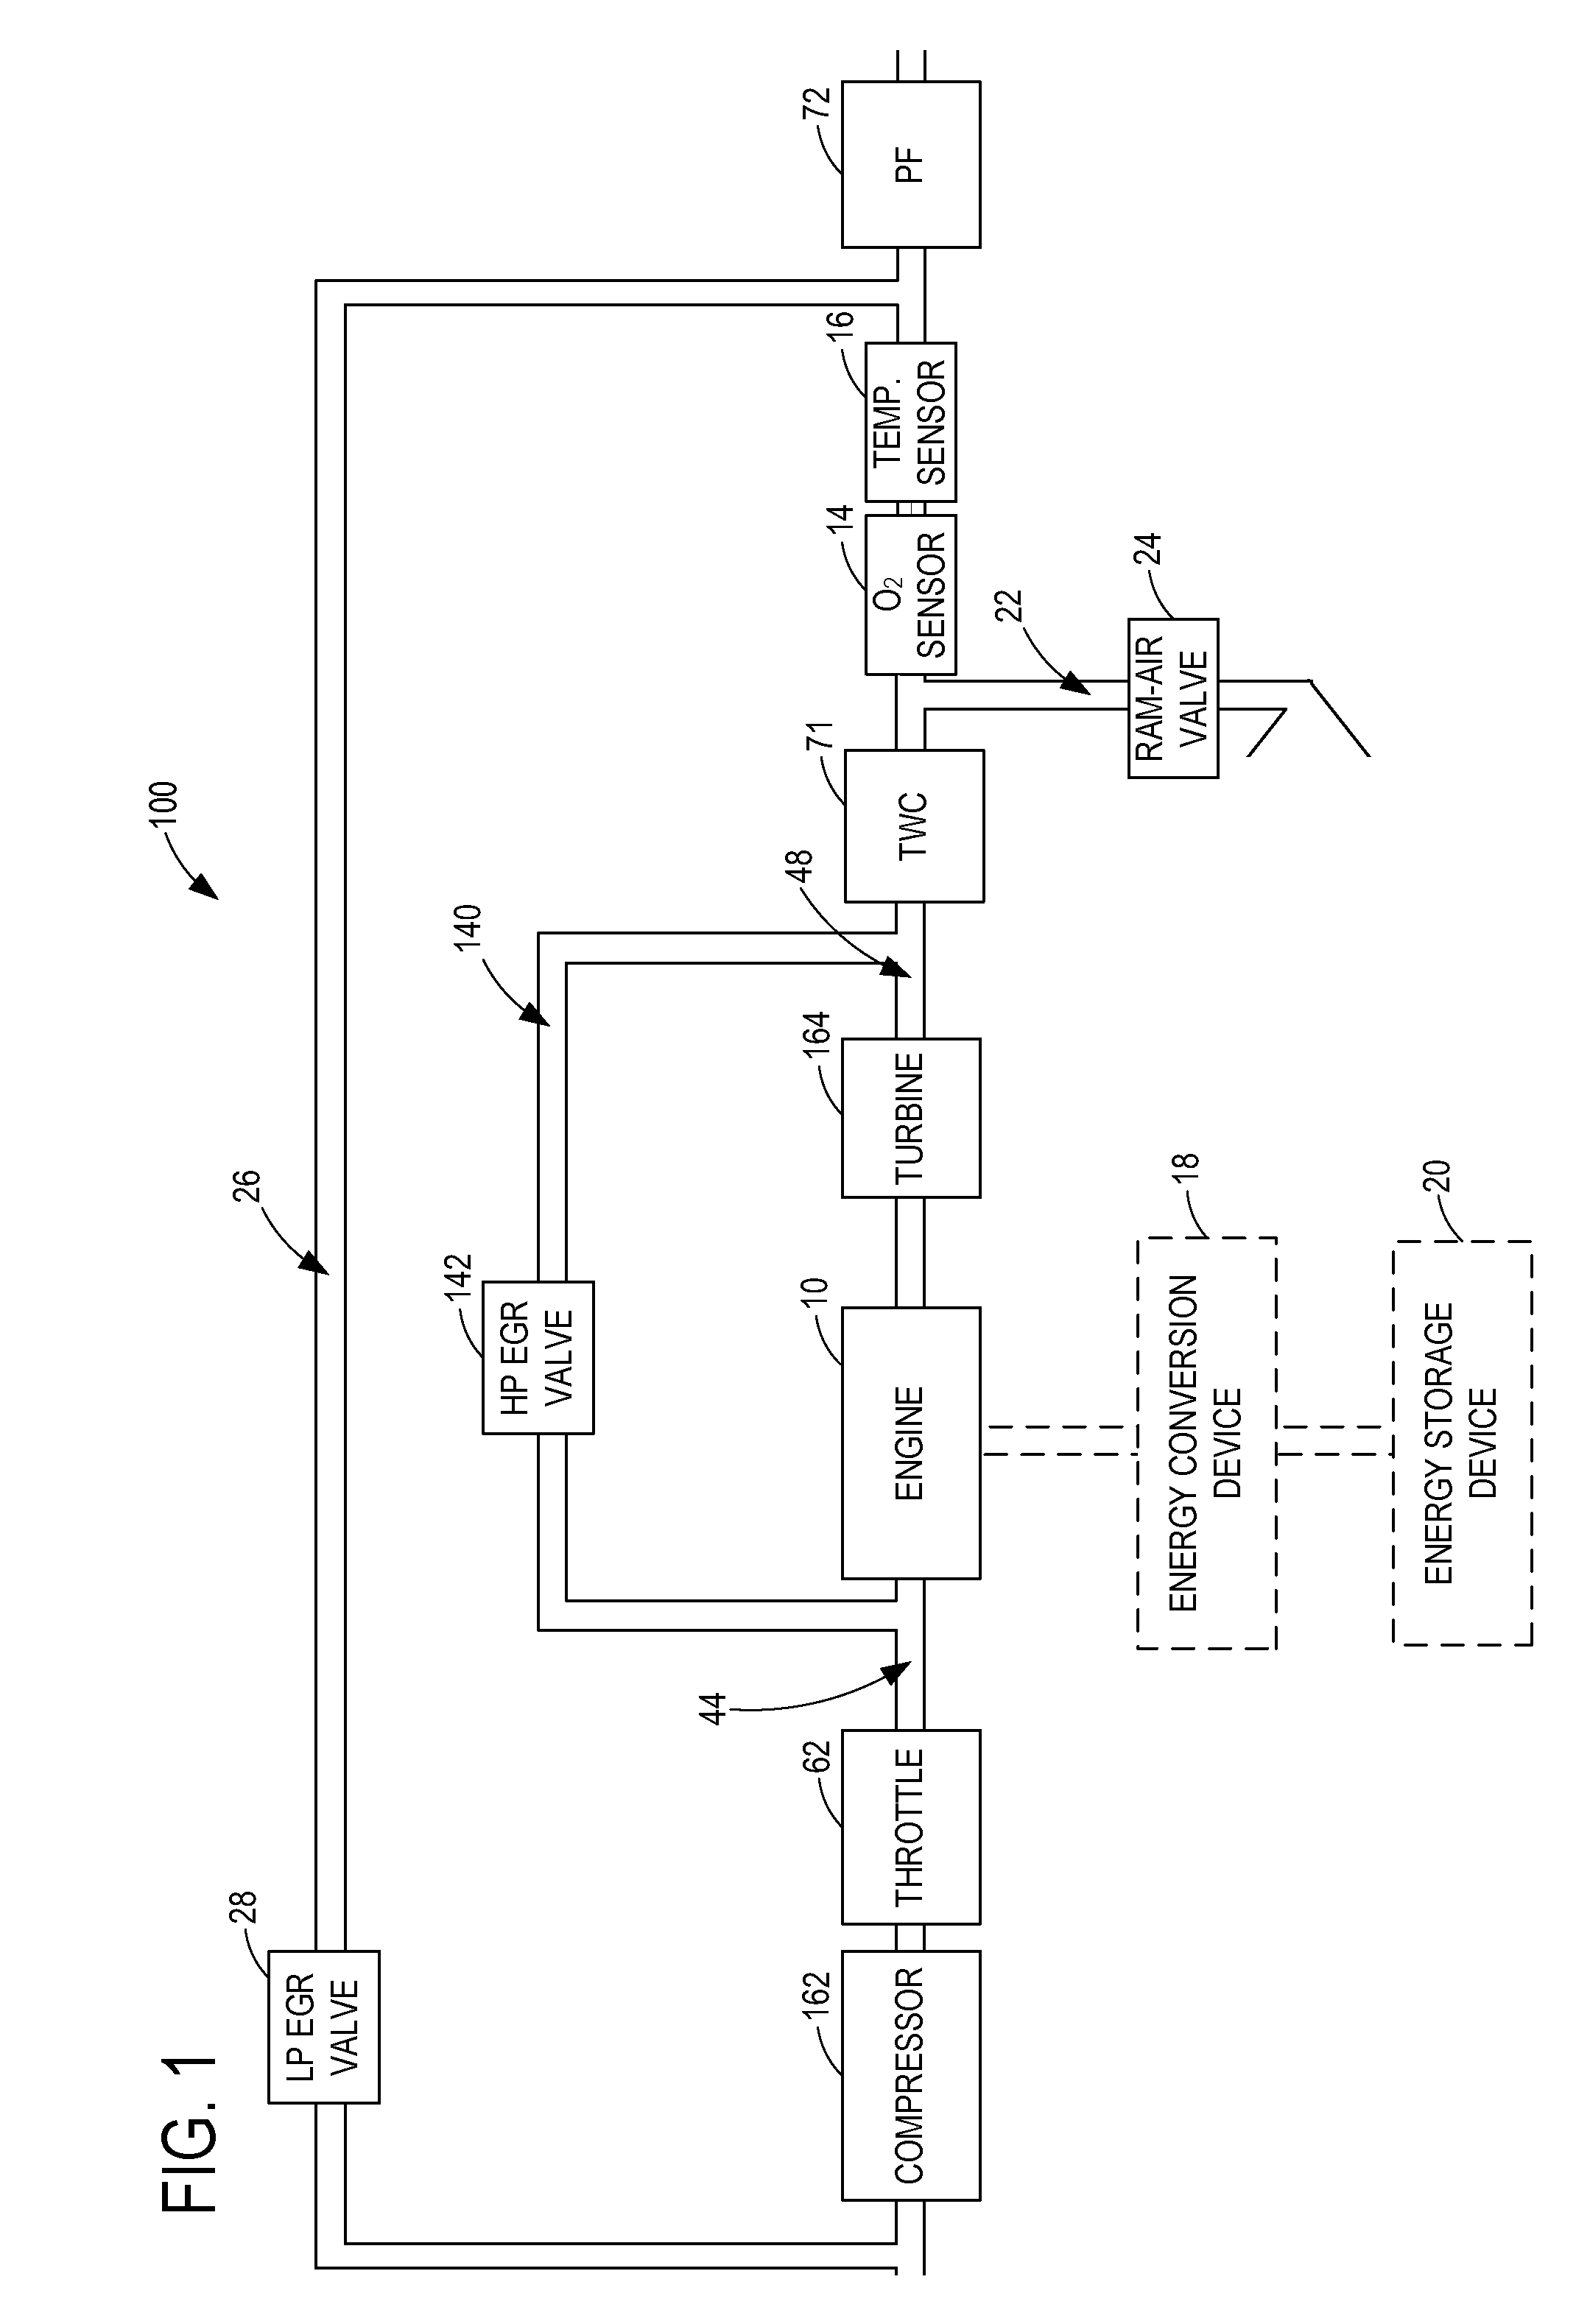 Particulate filter regeneration in an engine coupled to an energy conversion device